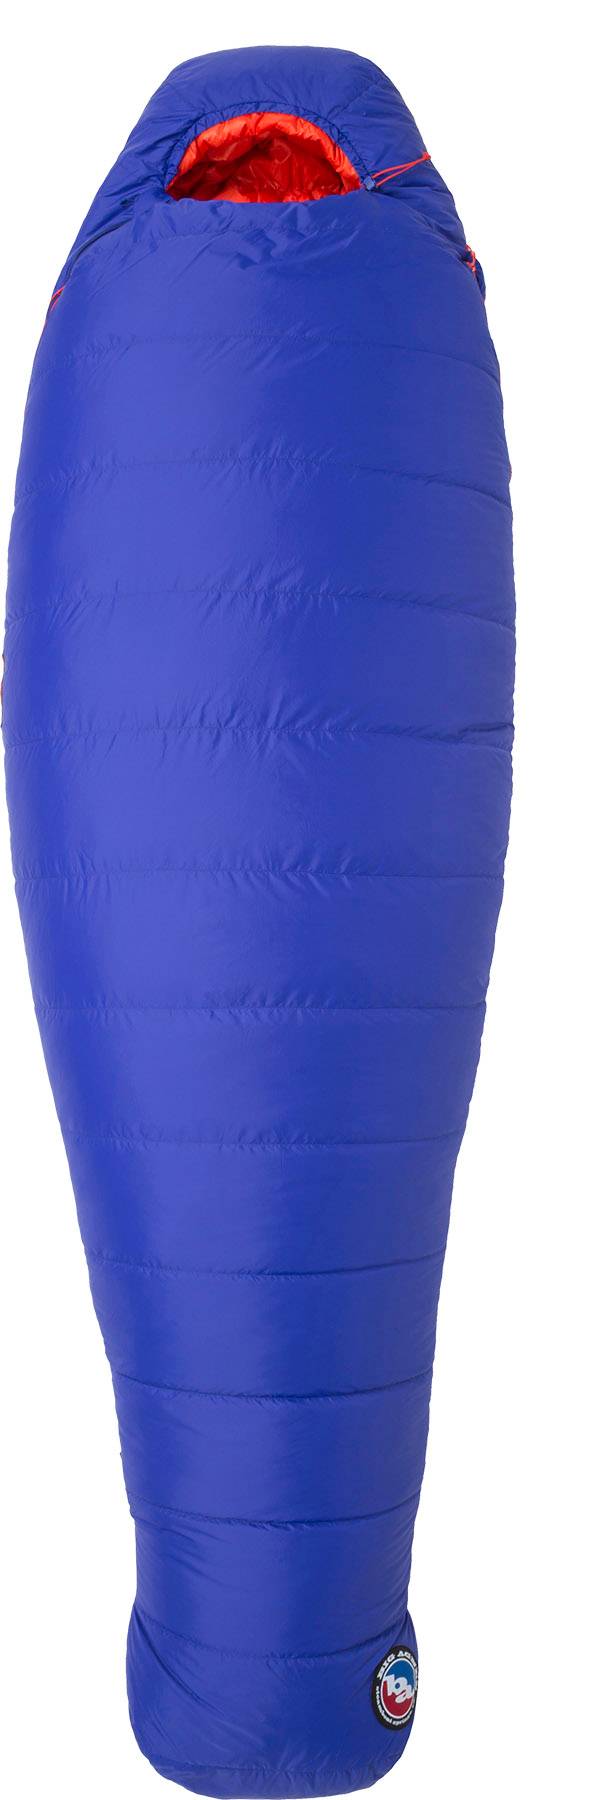 Big Agnes Women's Torchlight 20° Right Sleeping Bag product image